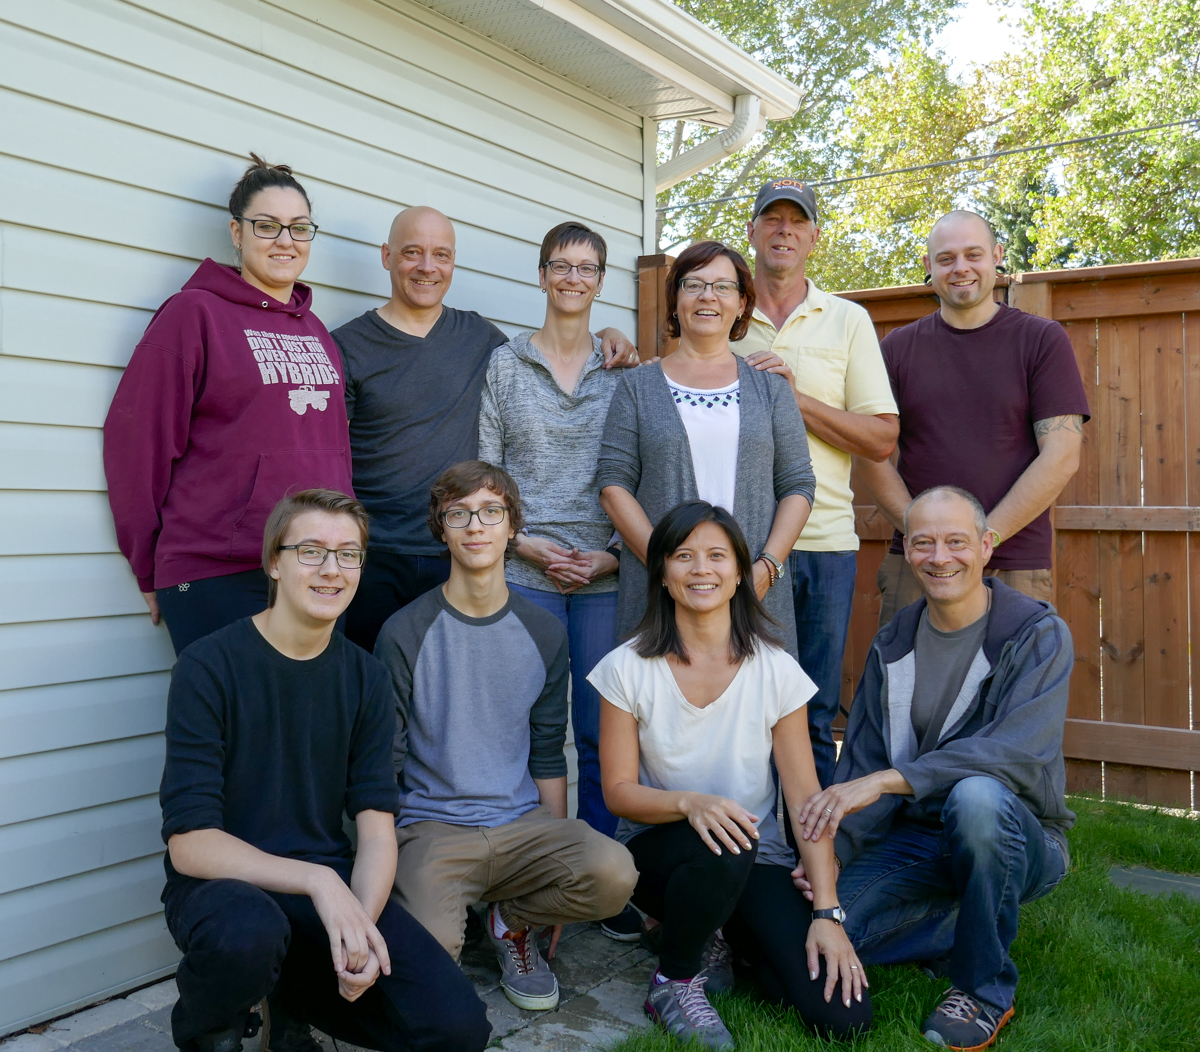 Gregor’s side of the family. Top row: Niece Tess, brother Gerald and his wife Marnie, Gesine and Reg, and Nephew Justin. Bottom row: Nephews Ryan and Jared with me and Gregor.